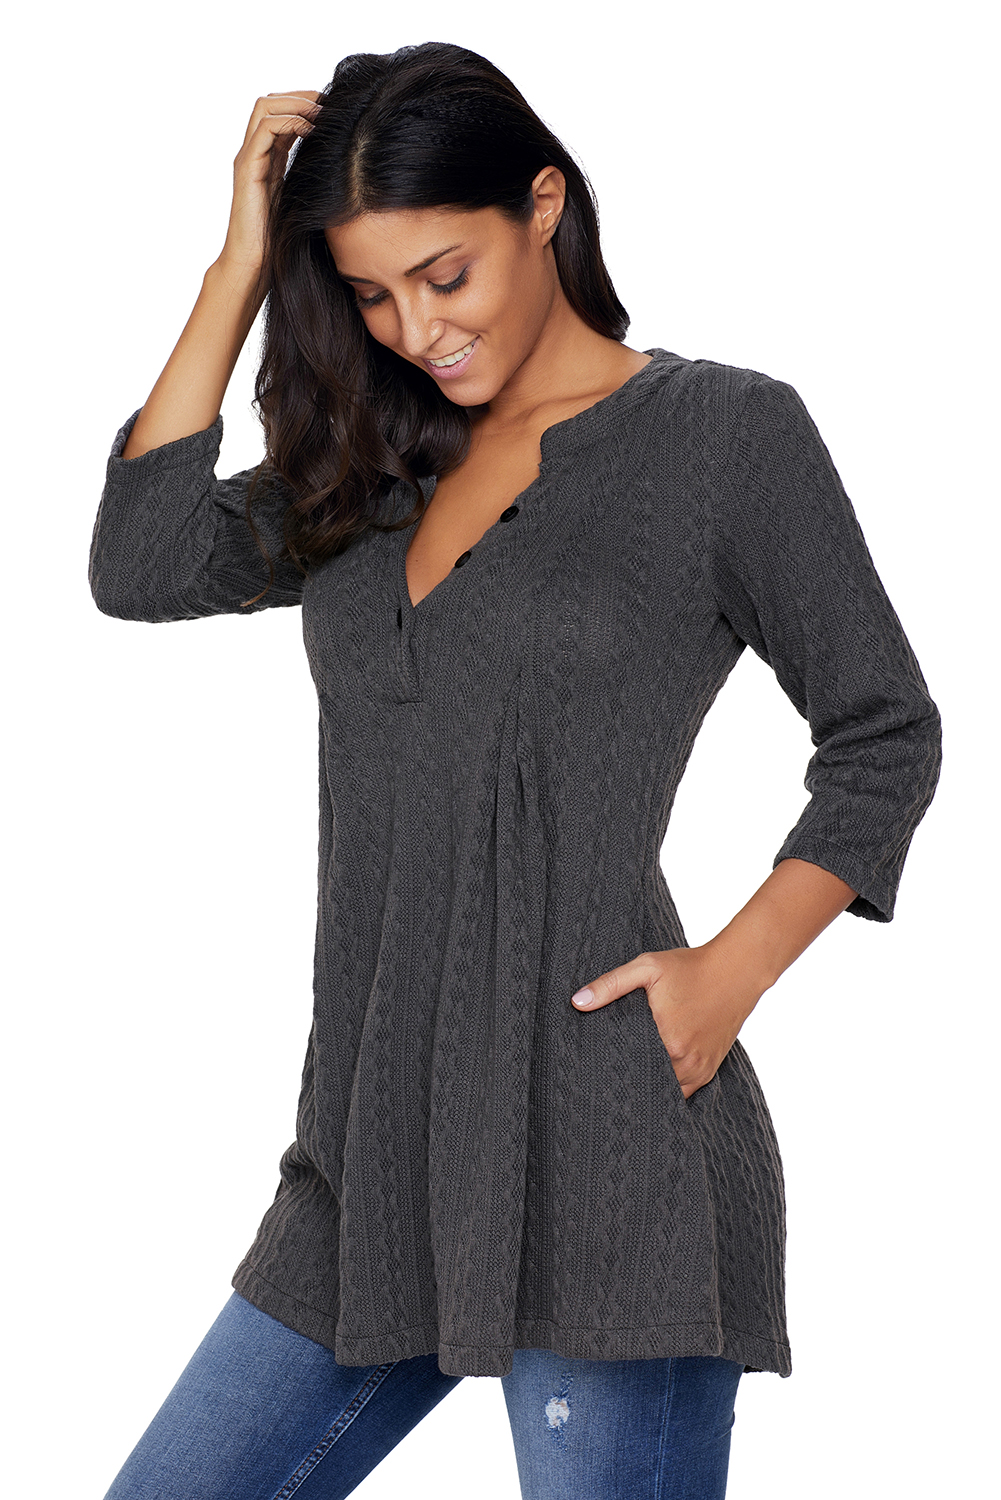 BY27750-1011 Charcoal Cable Knit Button Neck Swingy Tunic